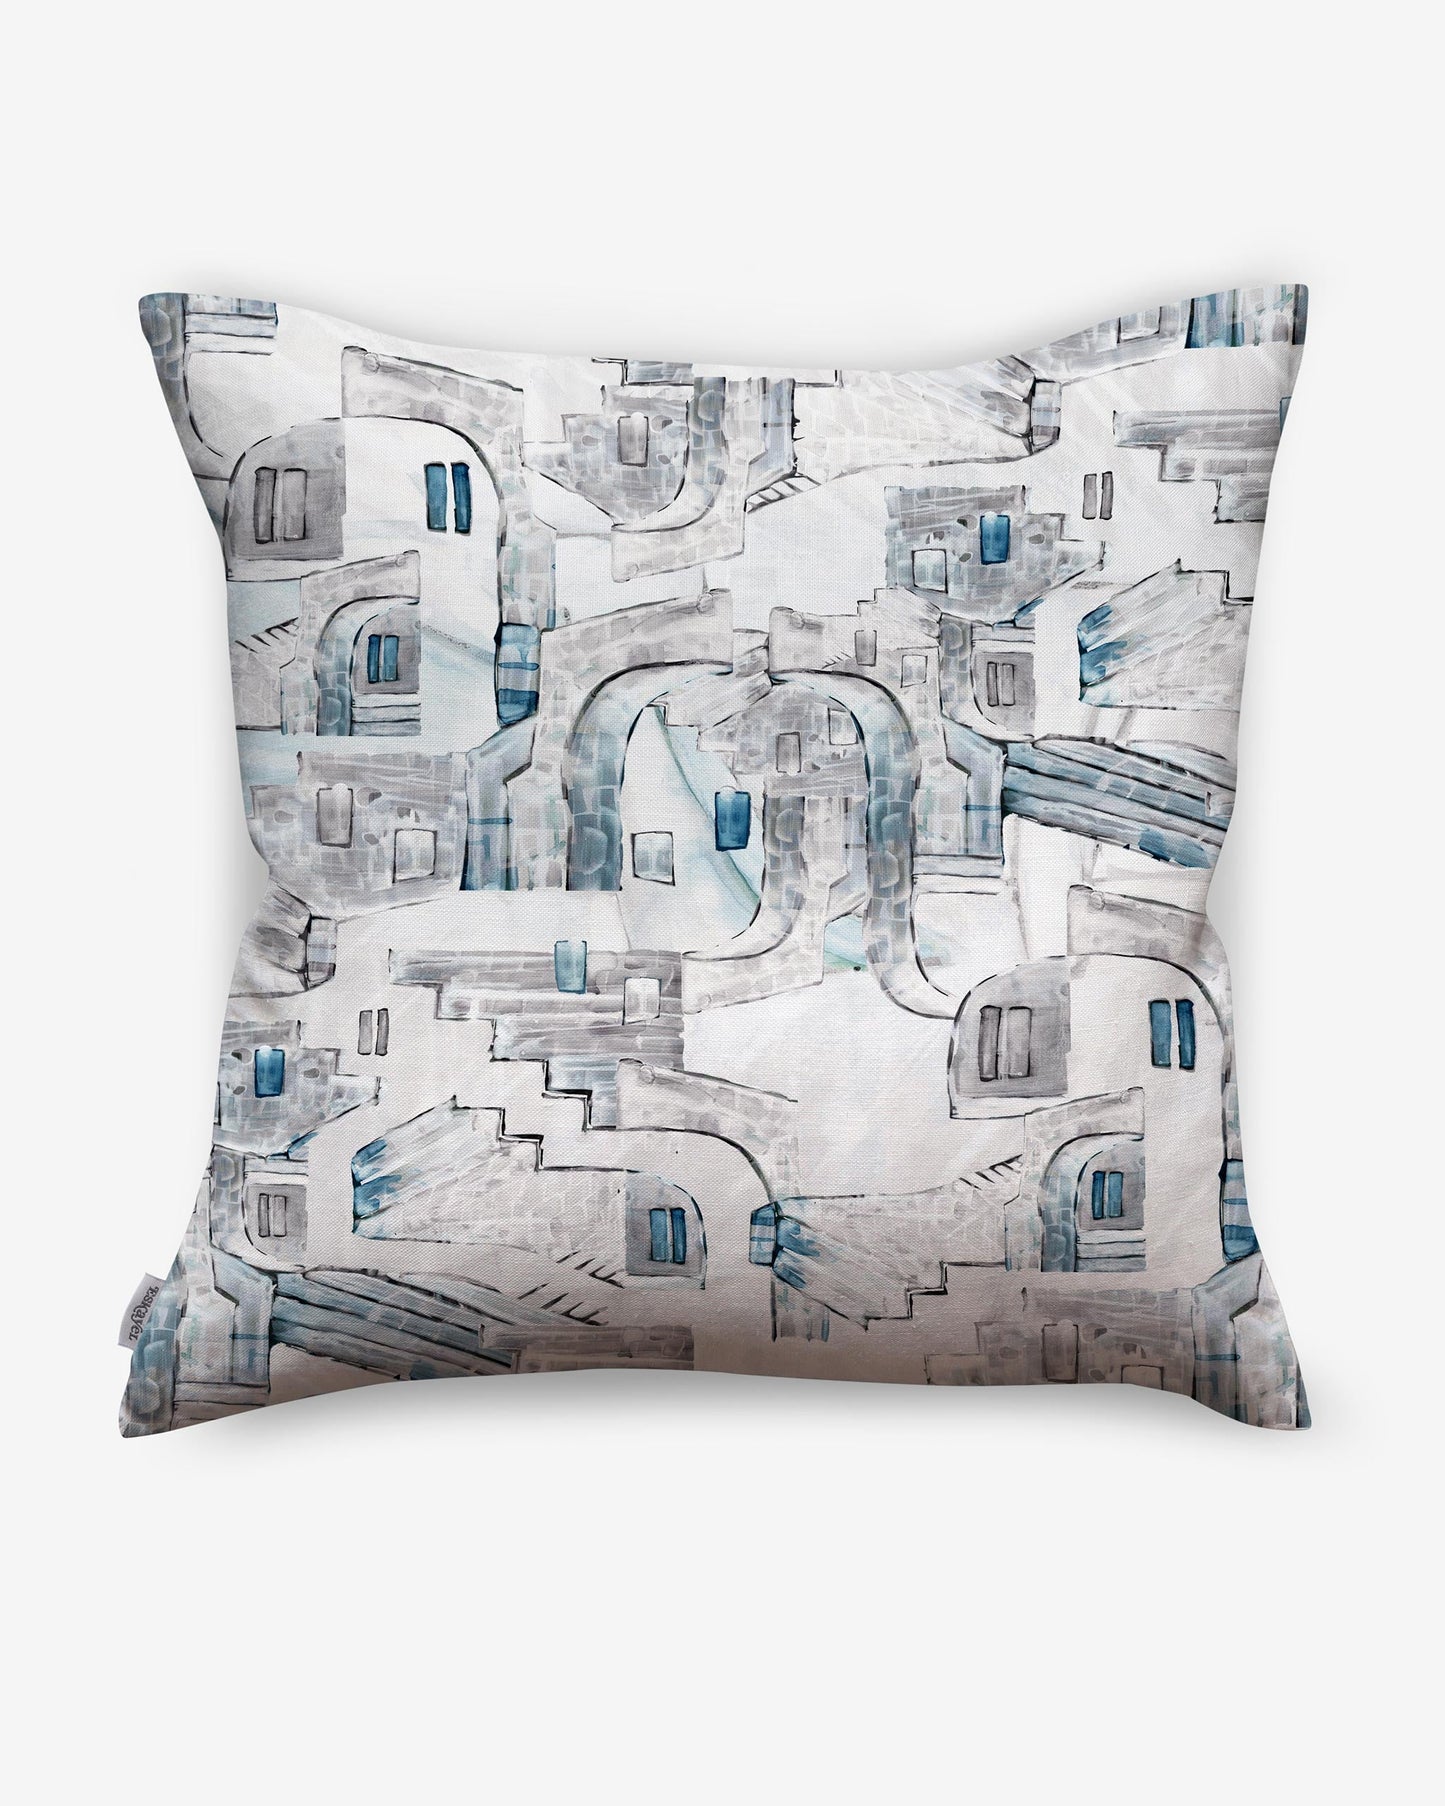 A La Scala Pillow Notte with a blue and white design on it